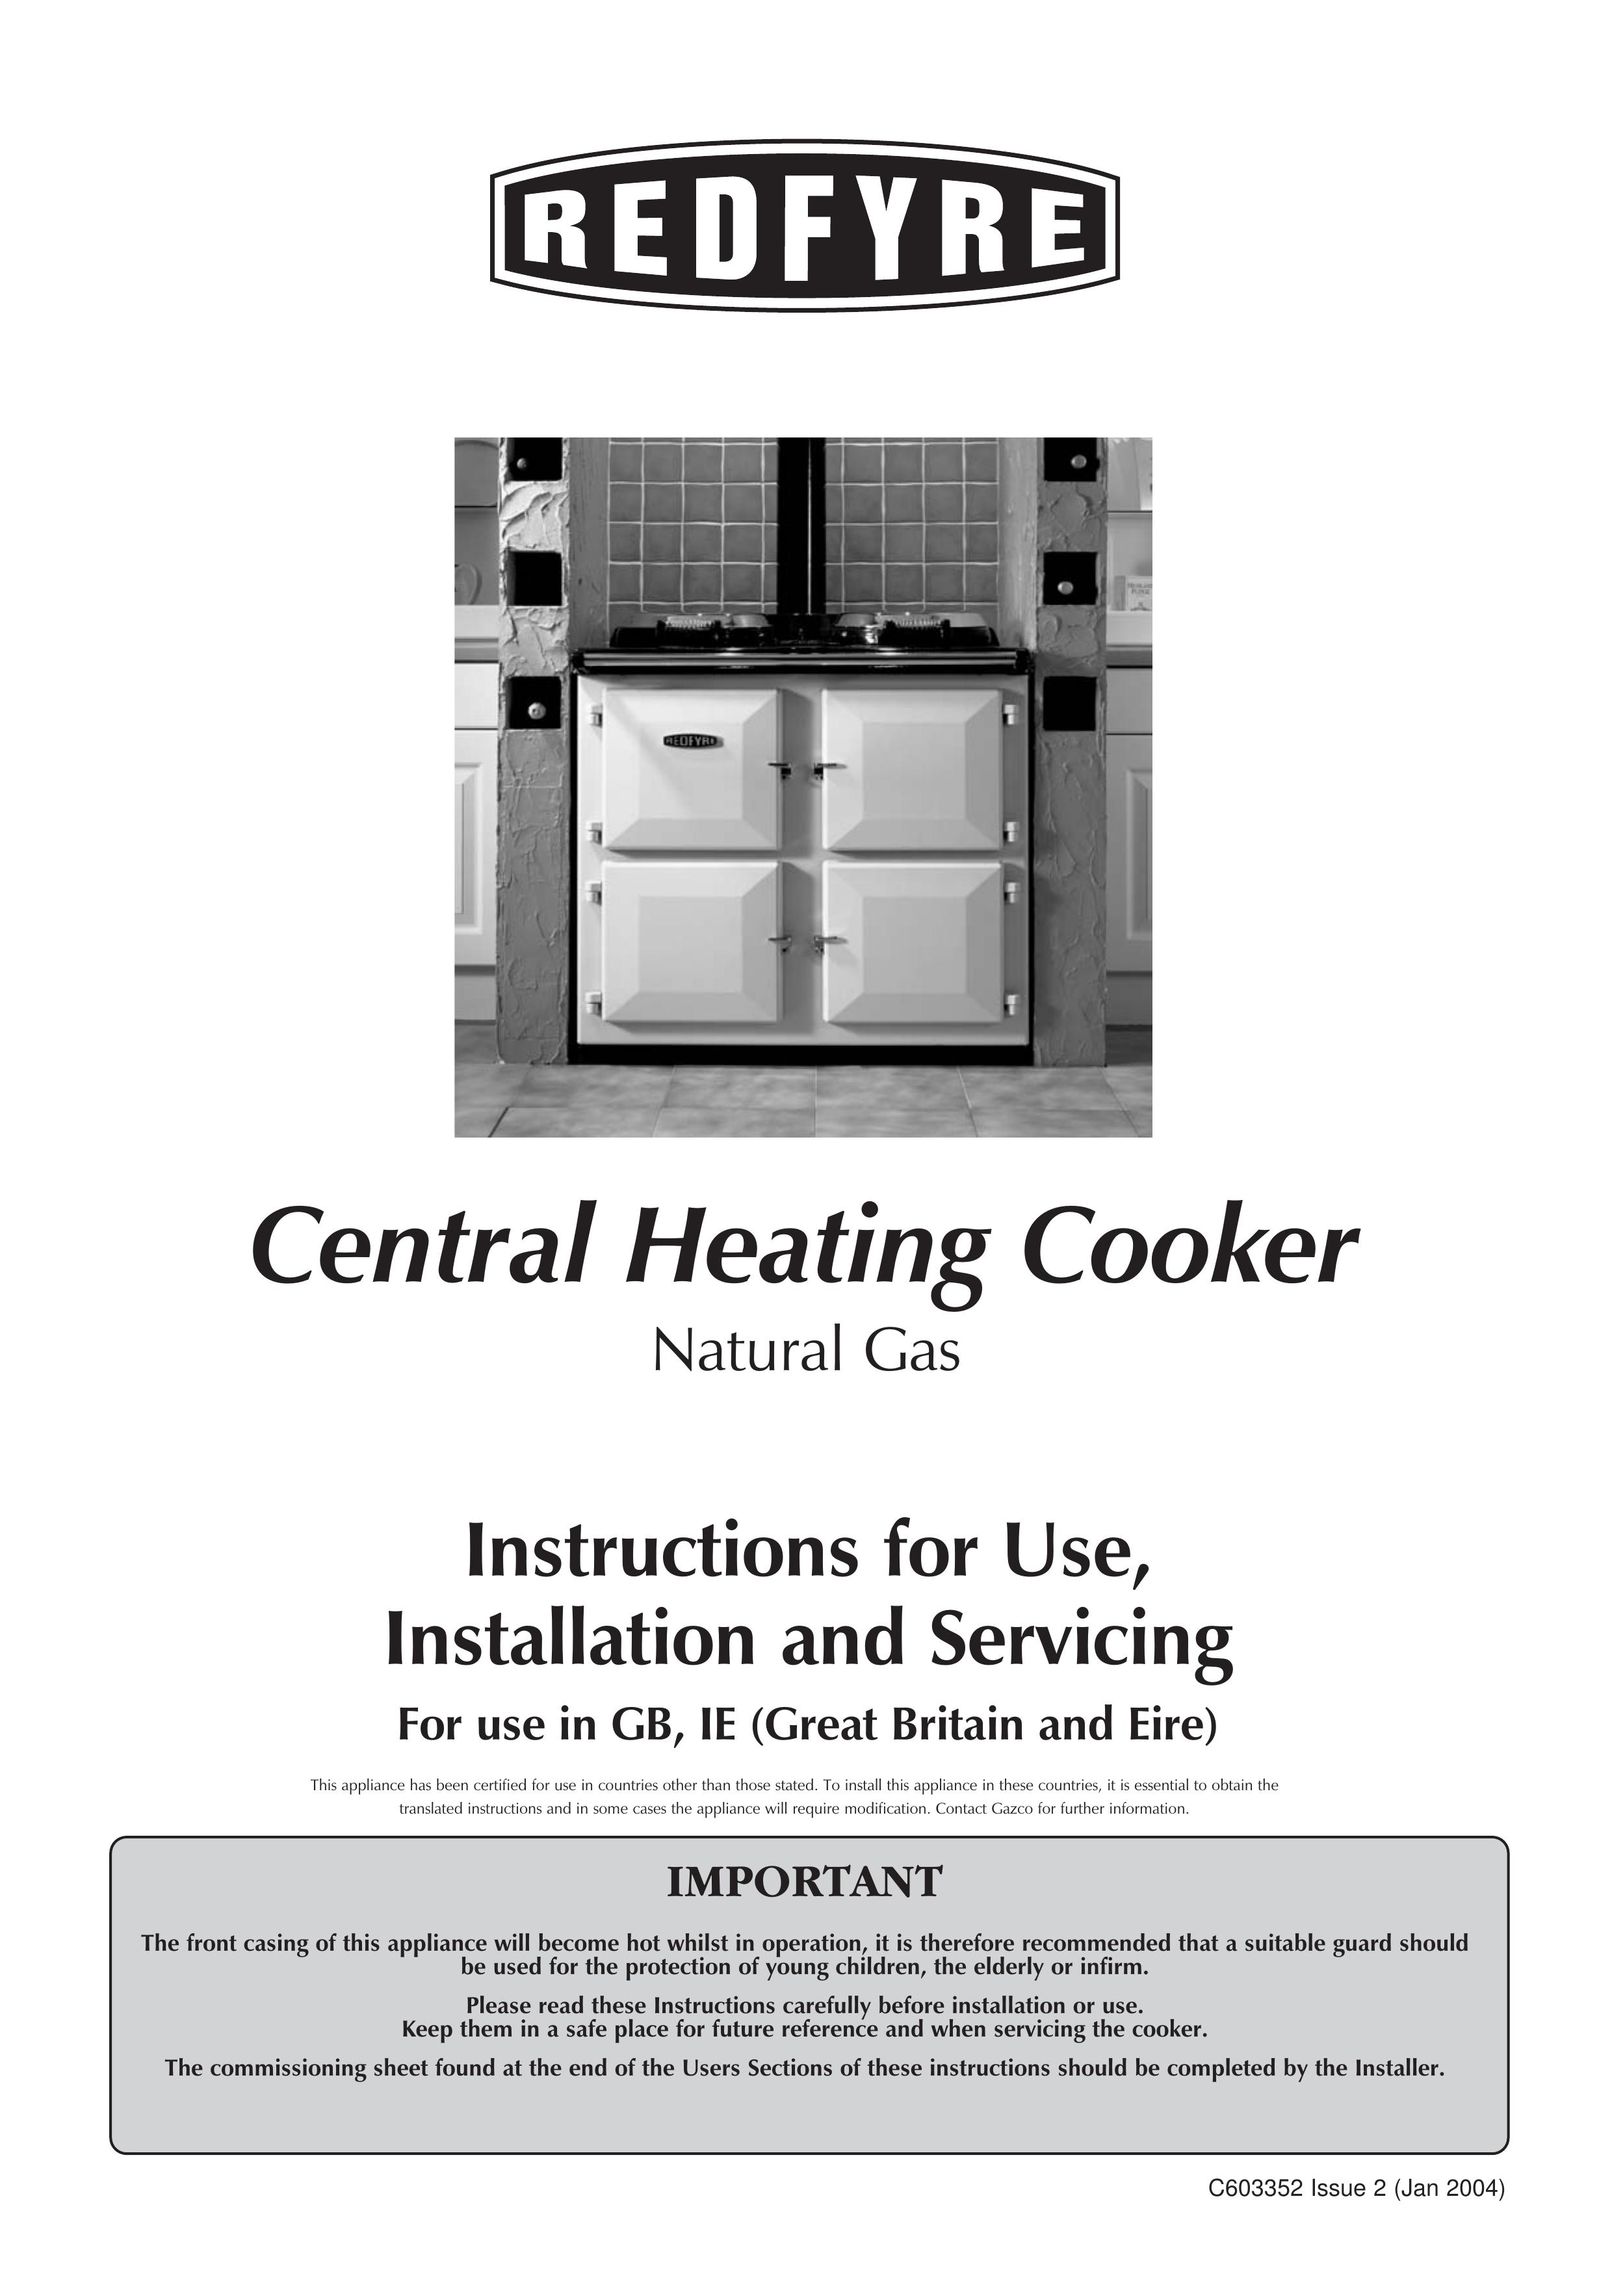 Honeywell Central Heating Cooker Natural Gas Cooktop User Manual